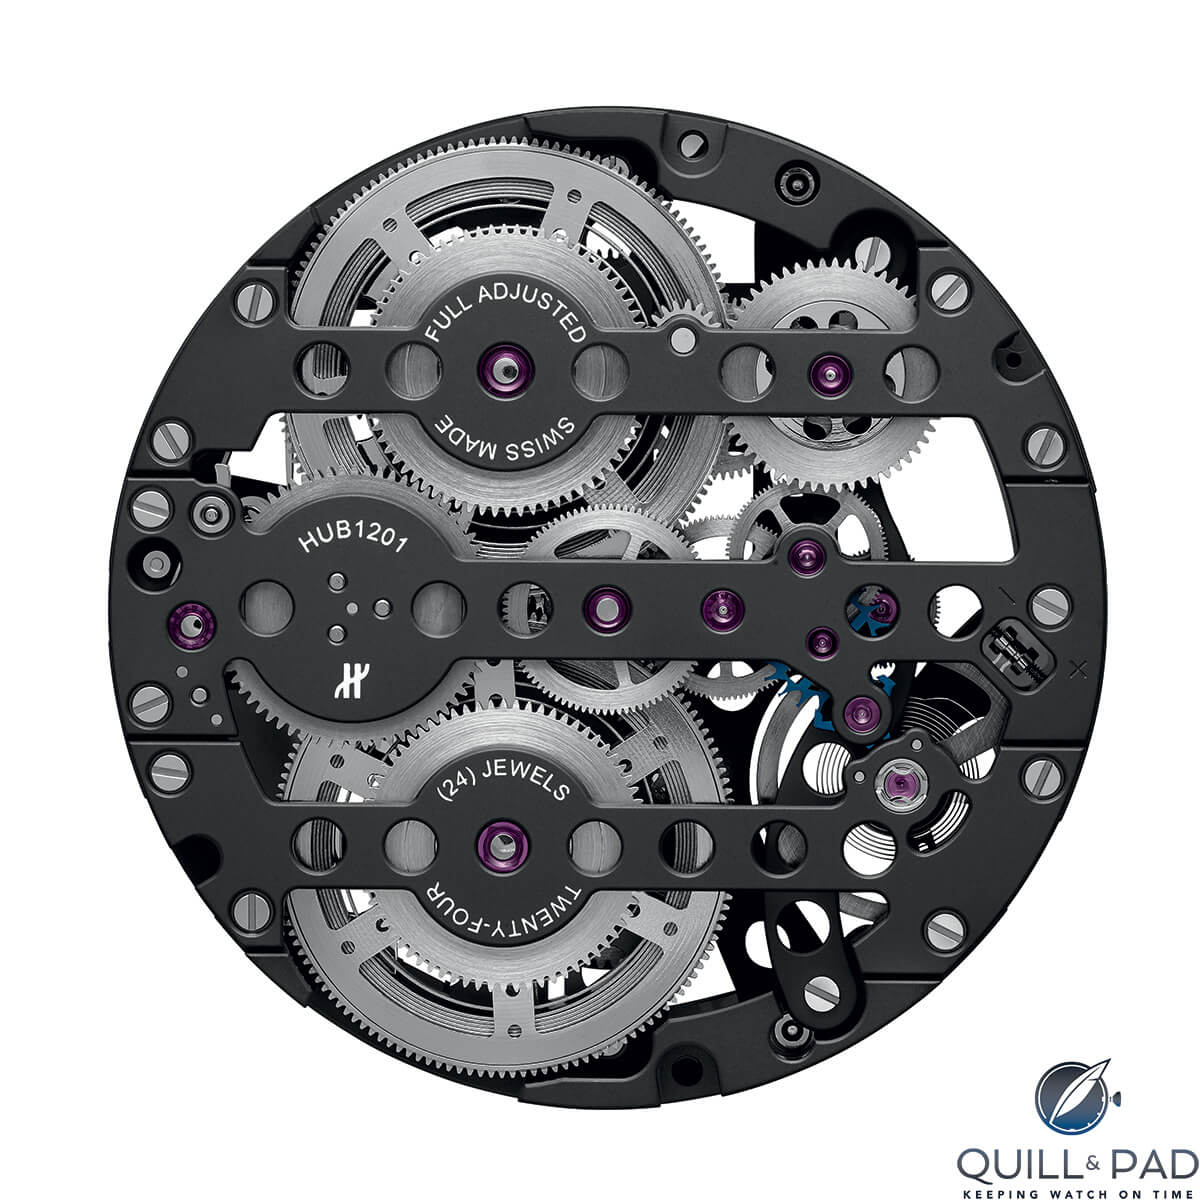 Back of the movement of the Hublot Big Bang MECA-10 showing the two large mainspring barrels